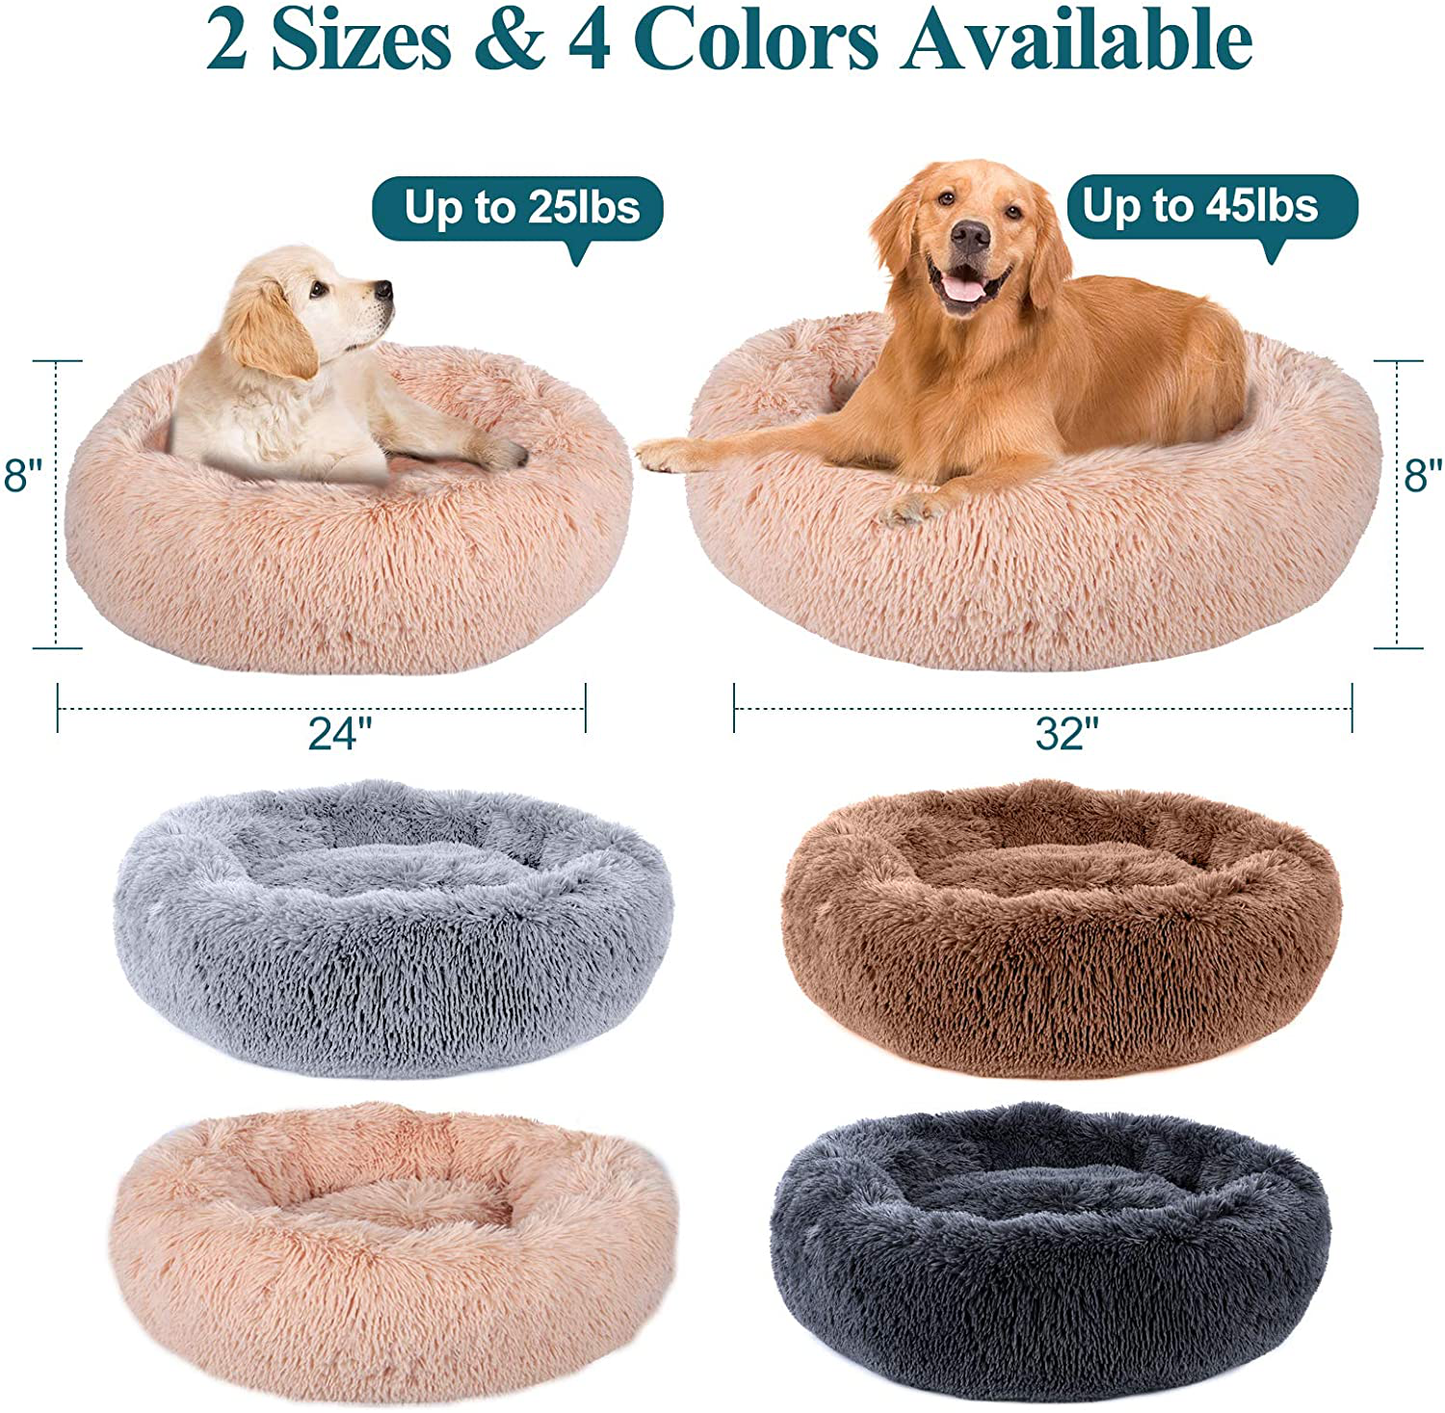 Pjyucien Calming Dog Bed Cat Bed, Large Medium Small Pet Beds, Soft Cozy Donut Cuddler round Plush Beds for Dogs Cats, Waterproof & Anti-Slip Bottom, Machine Washable Animals & Pet Supplies > Pet Supplies > Dog Supplies > Dog Beds PJYuCien   